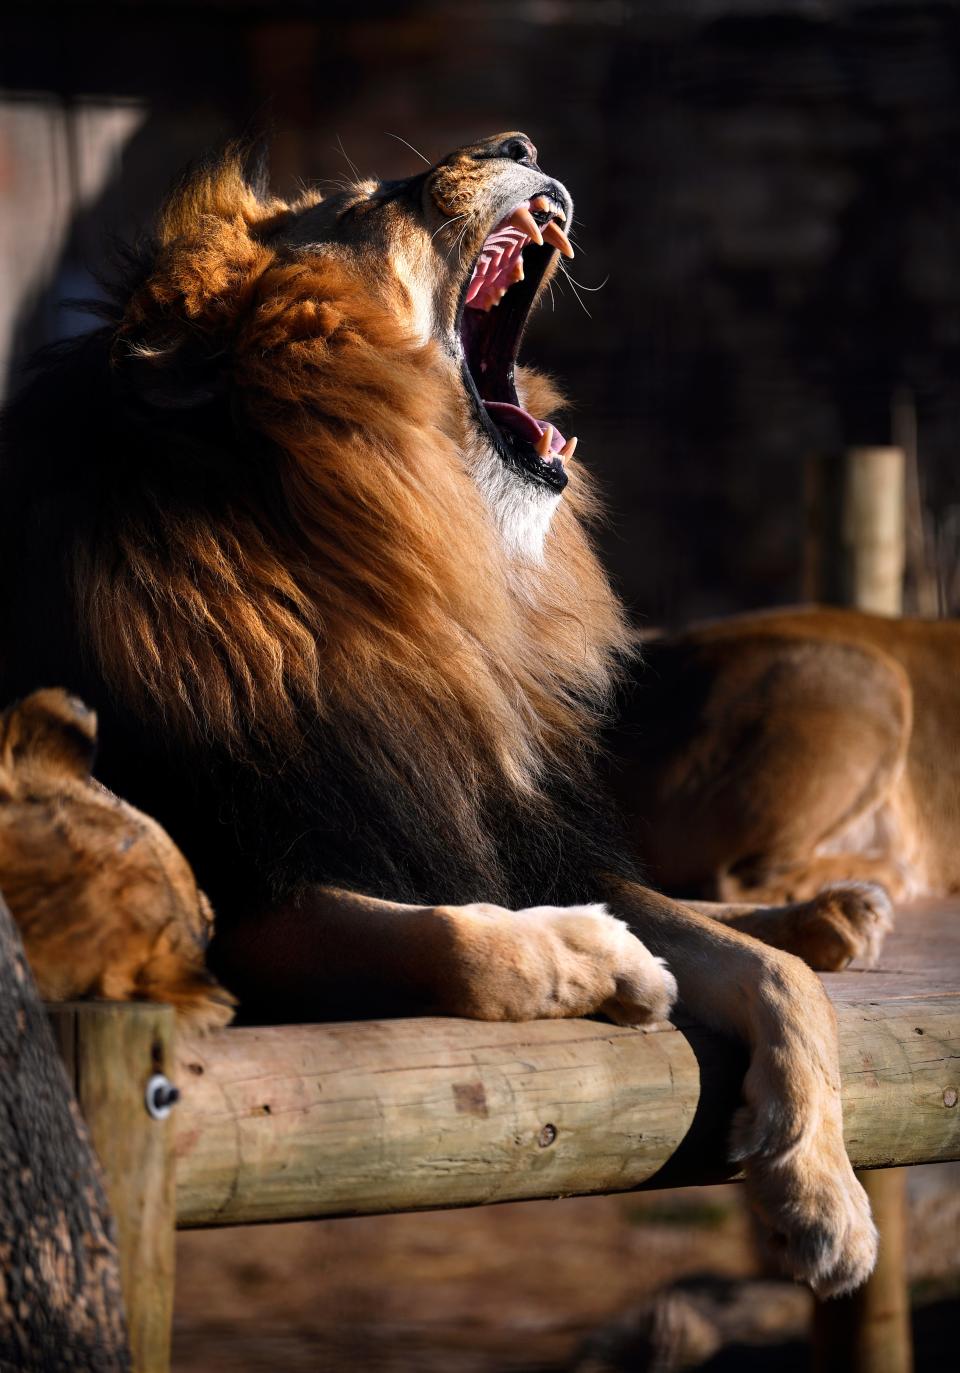 A male African lion, Jabulani, yawns in the warm afternoon light of the Abilene Zoo in Feb. 2022.